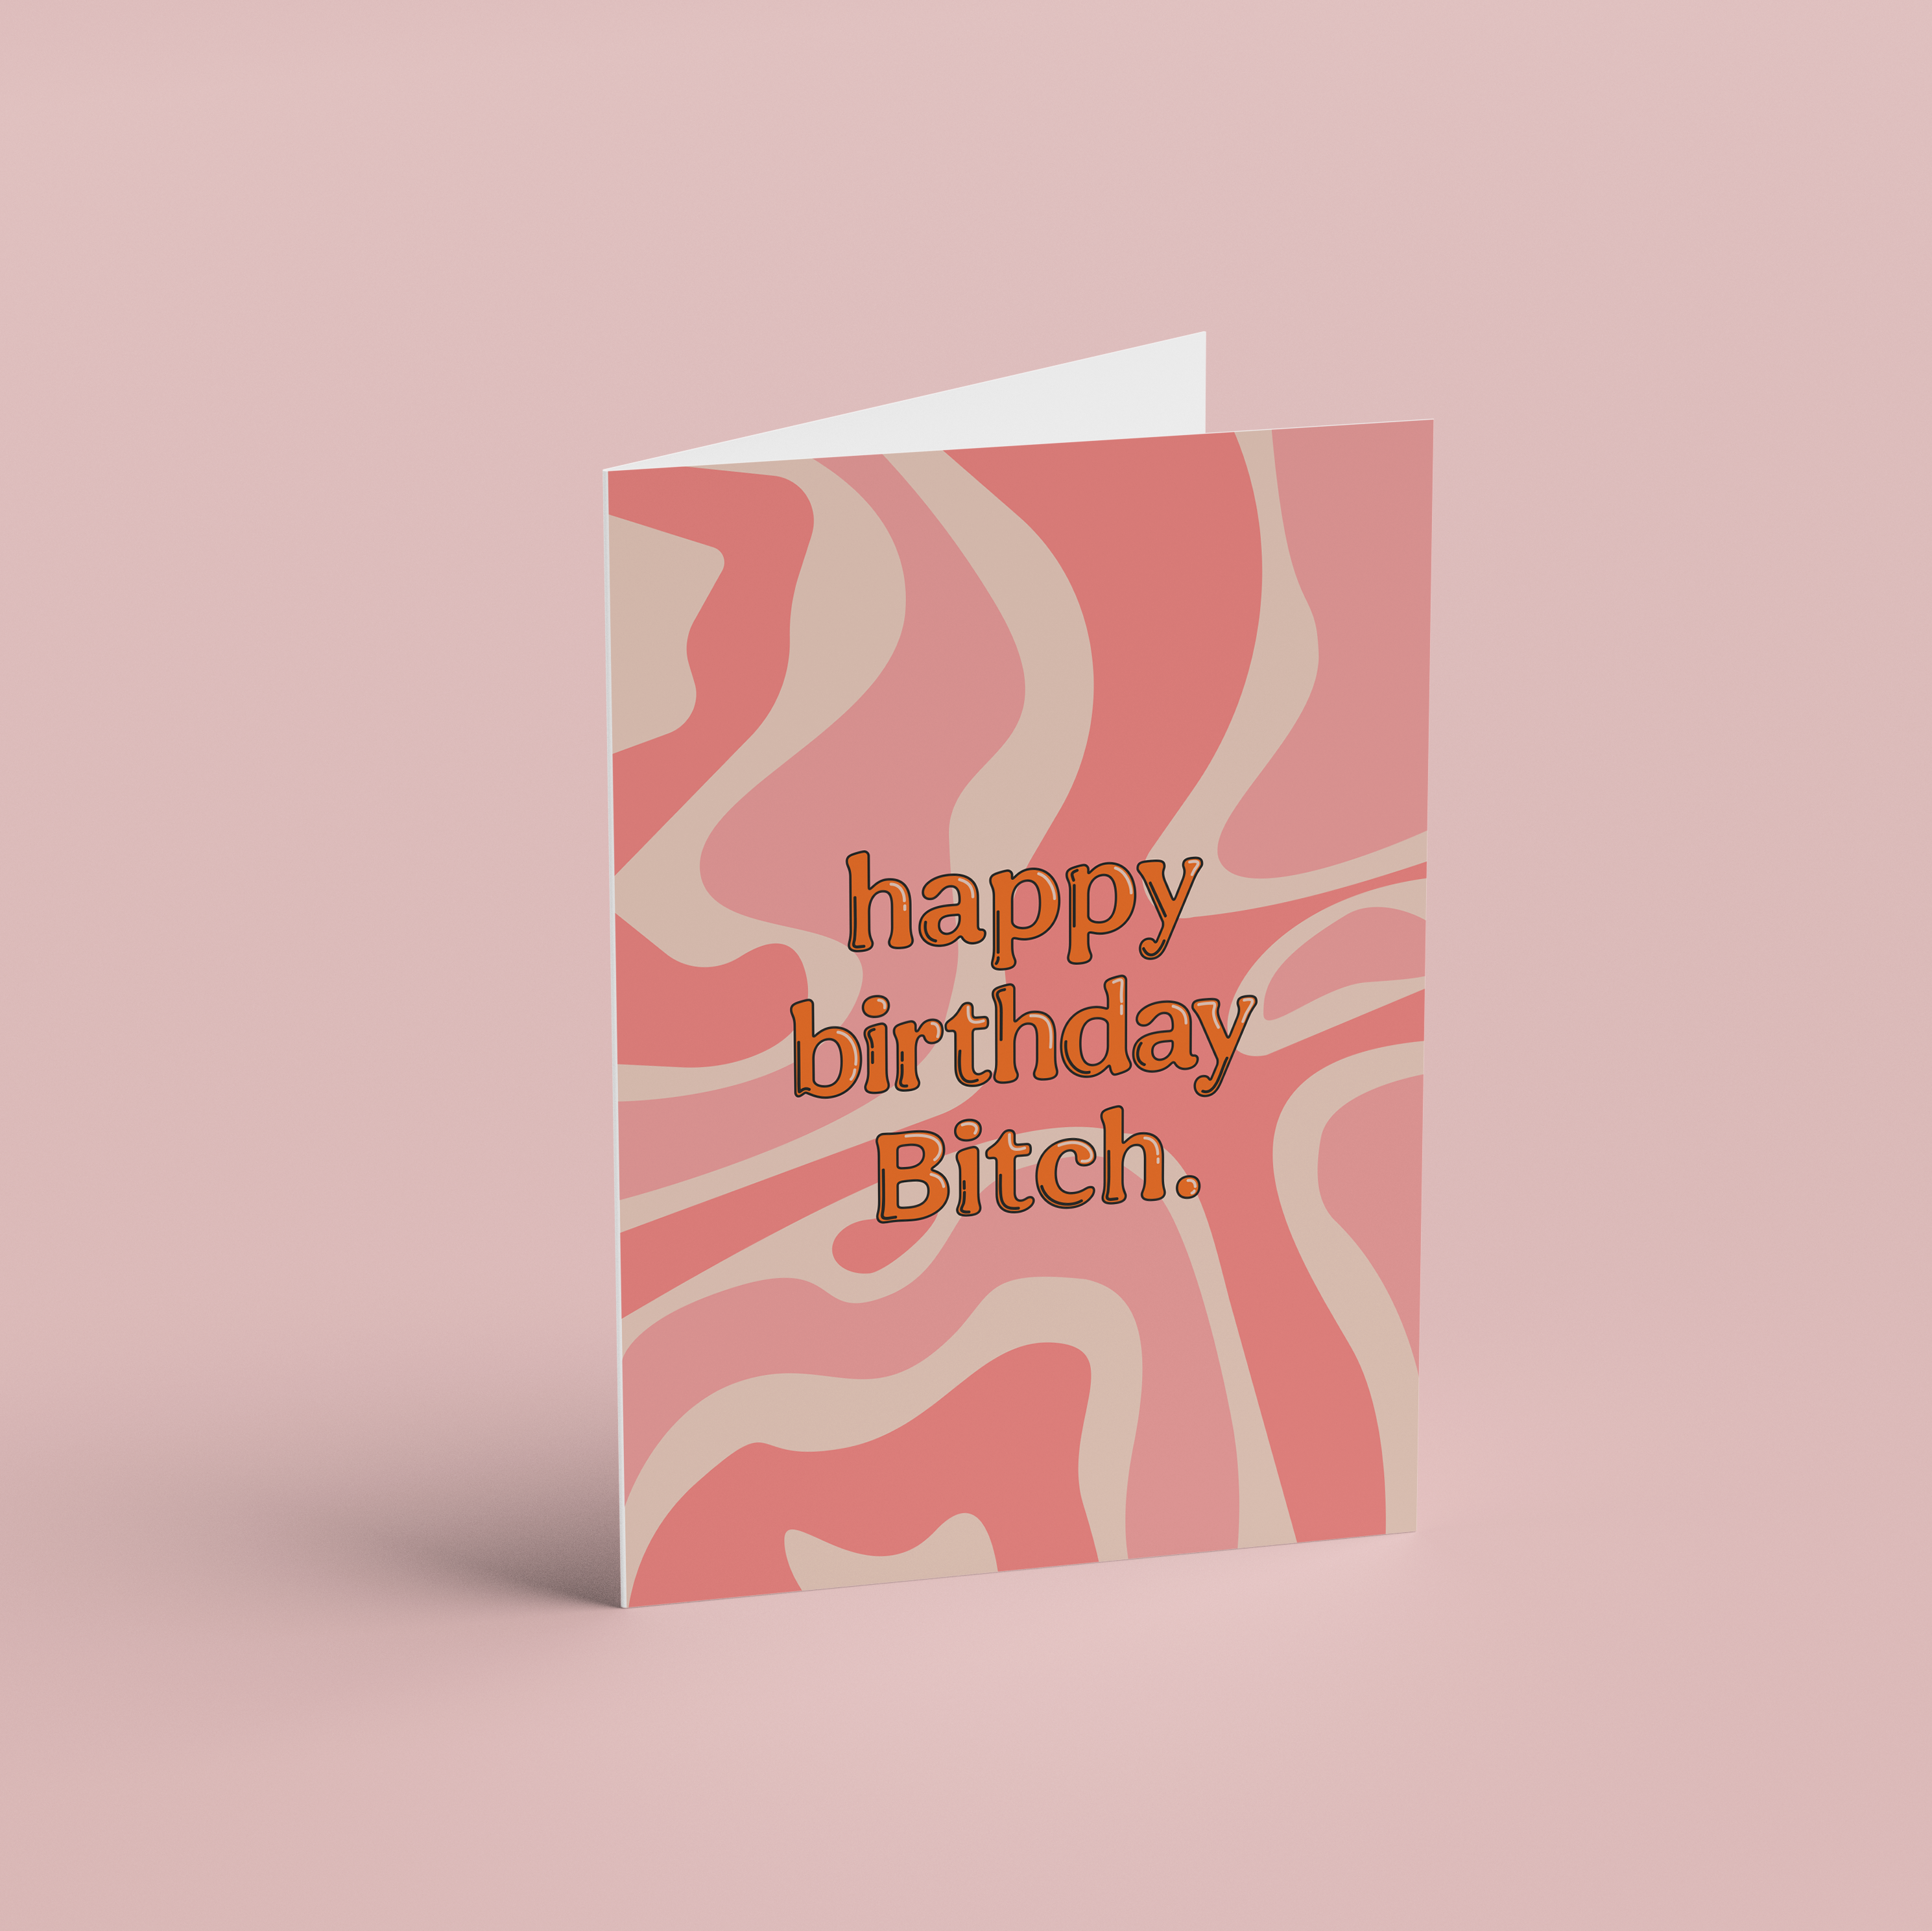 Colorful Birthday Card for her - Happy Birthday Bitch